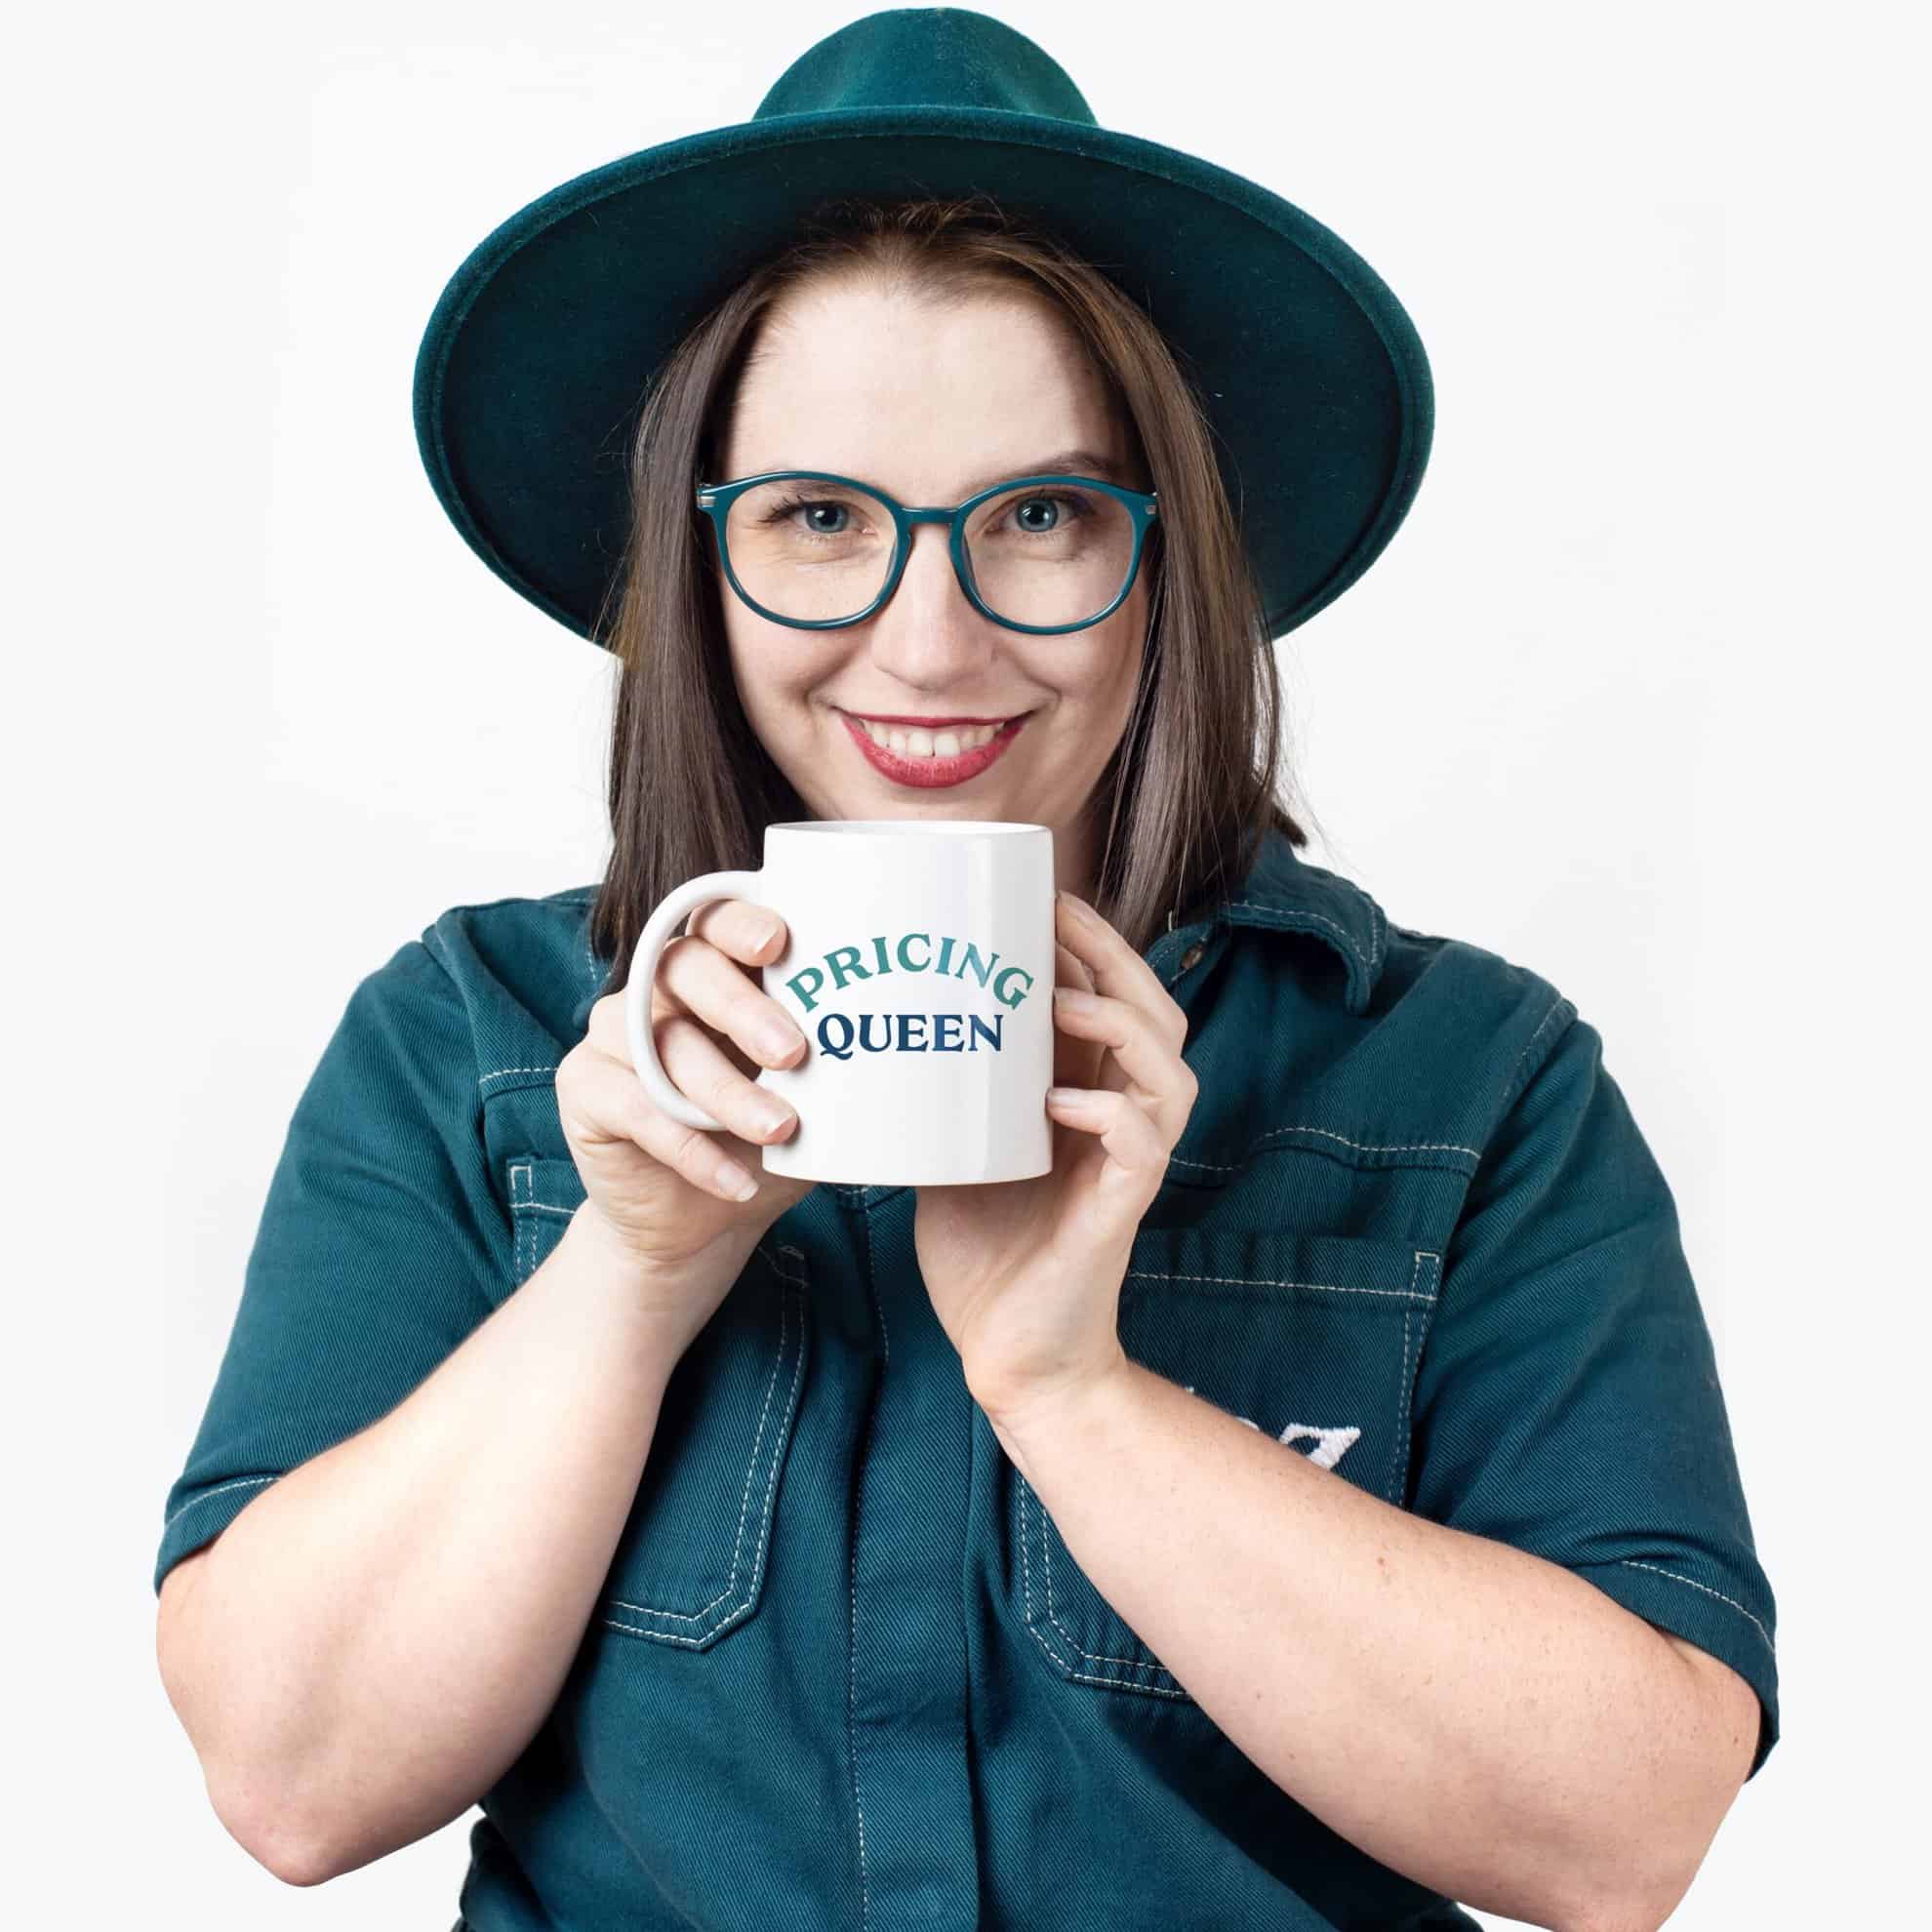 A woman wearing glasses and a hat holding a coffee mug.